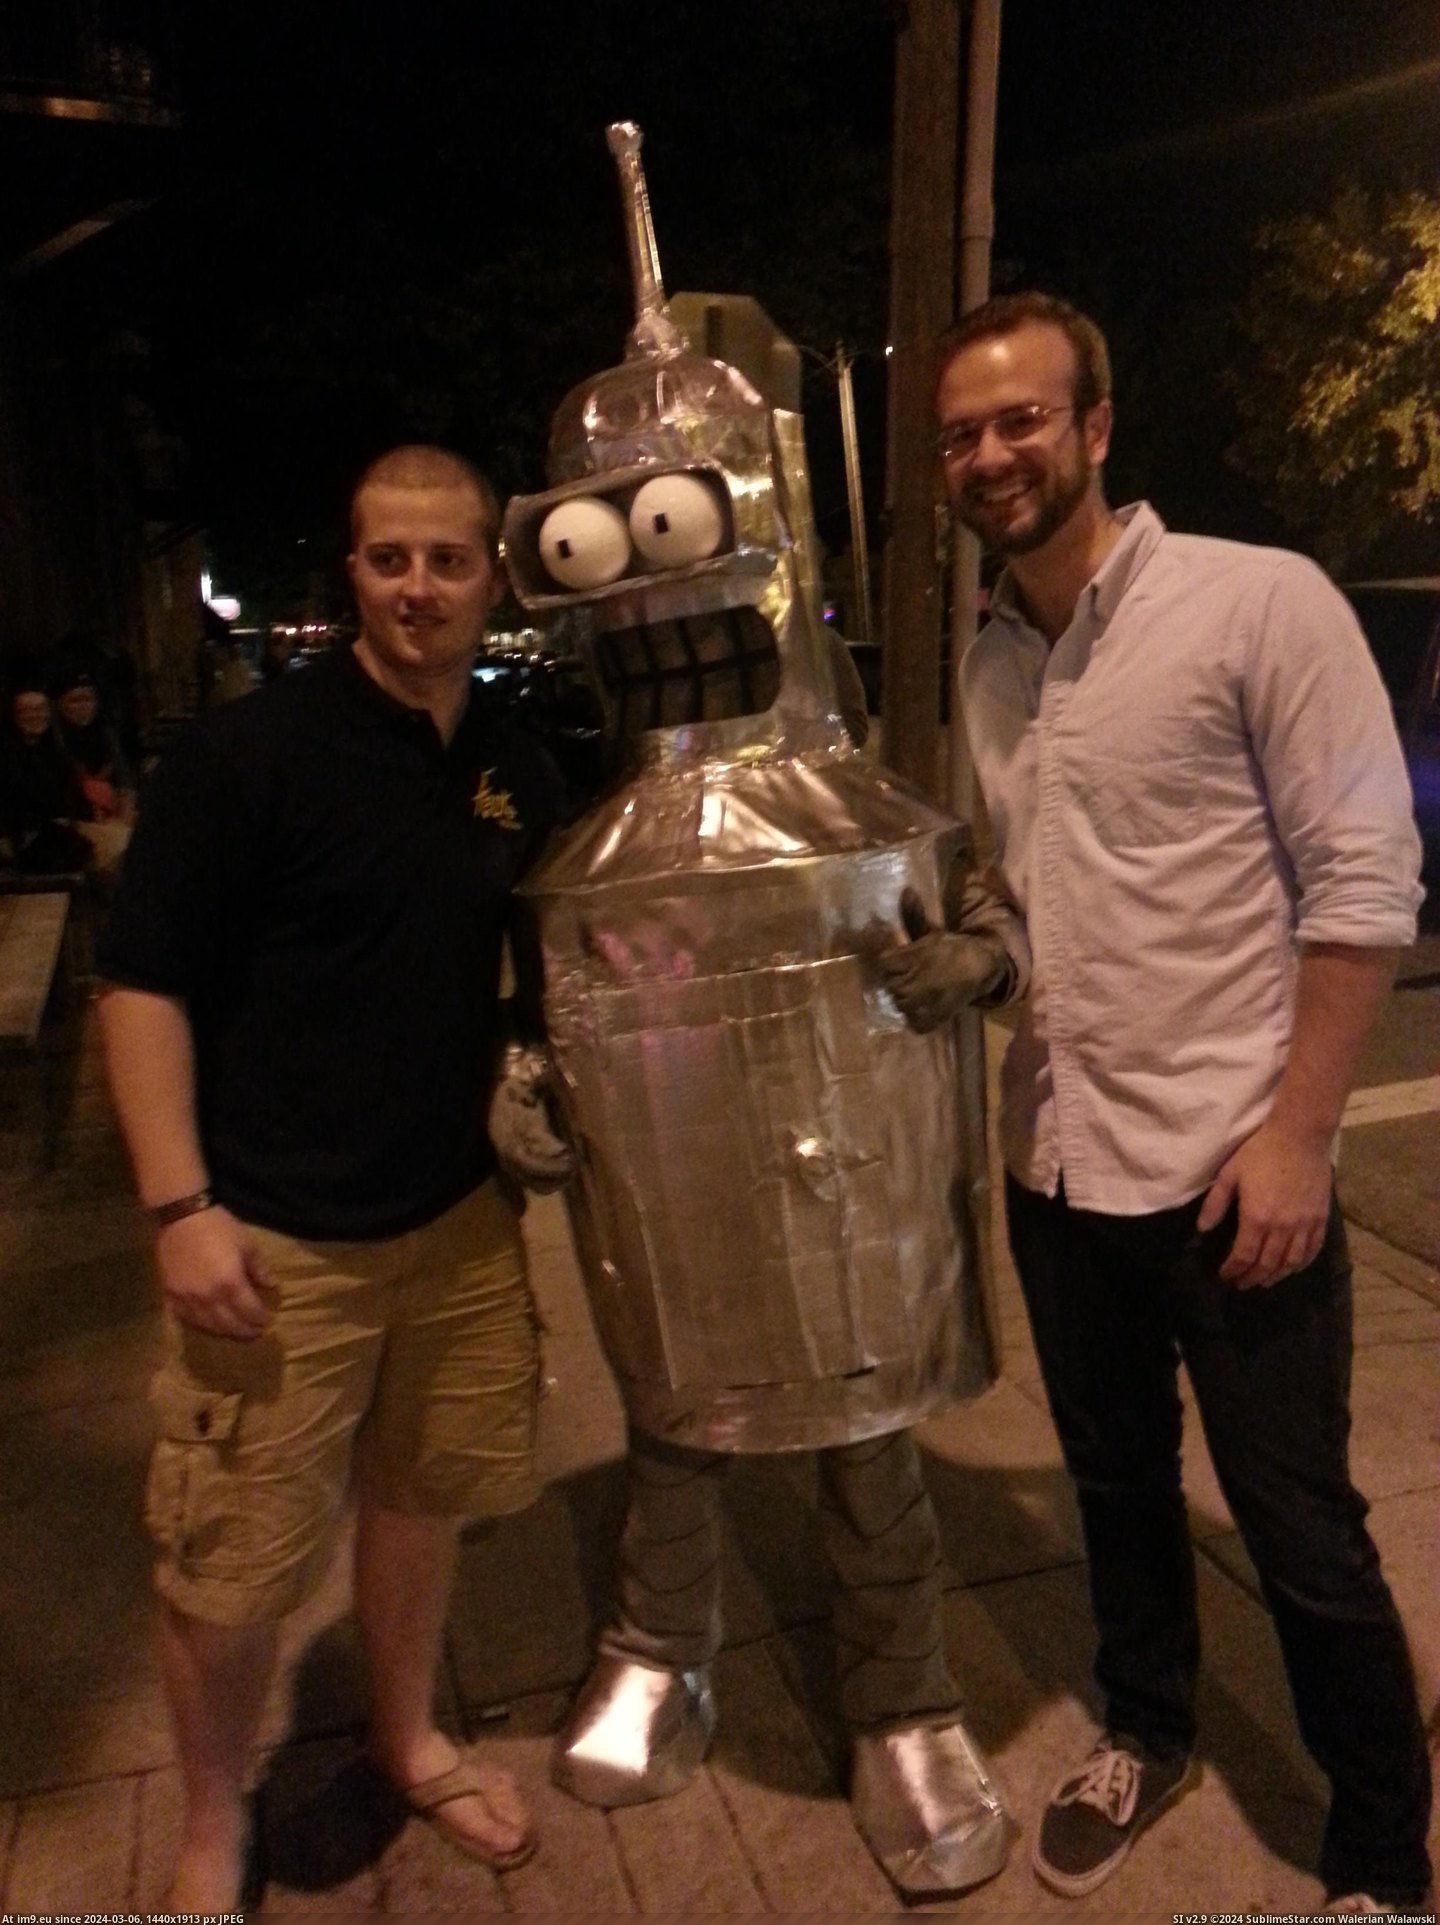 #Front #Costume #Liquor #Bender #Hatch #Opened #Reveal [Pics] The best Bender costume I've seen. The front hatch opened to reveal liquor. Pic. (Image of album My r/PICS favs))